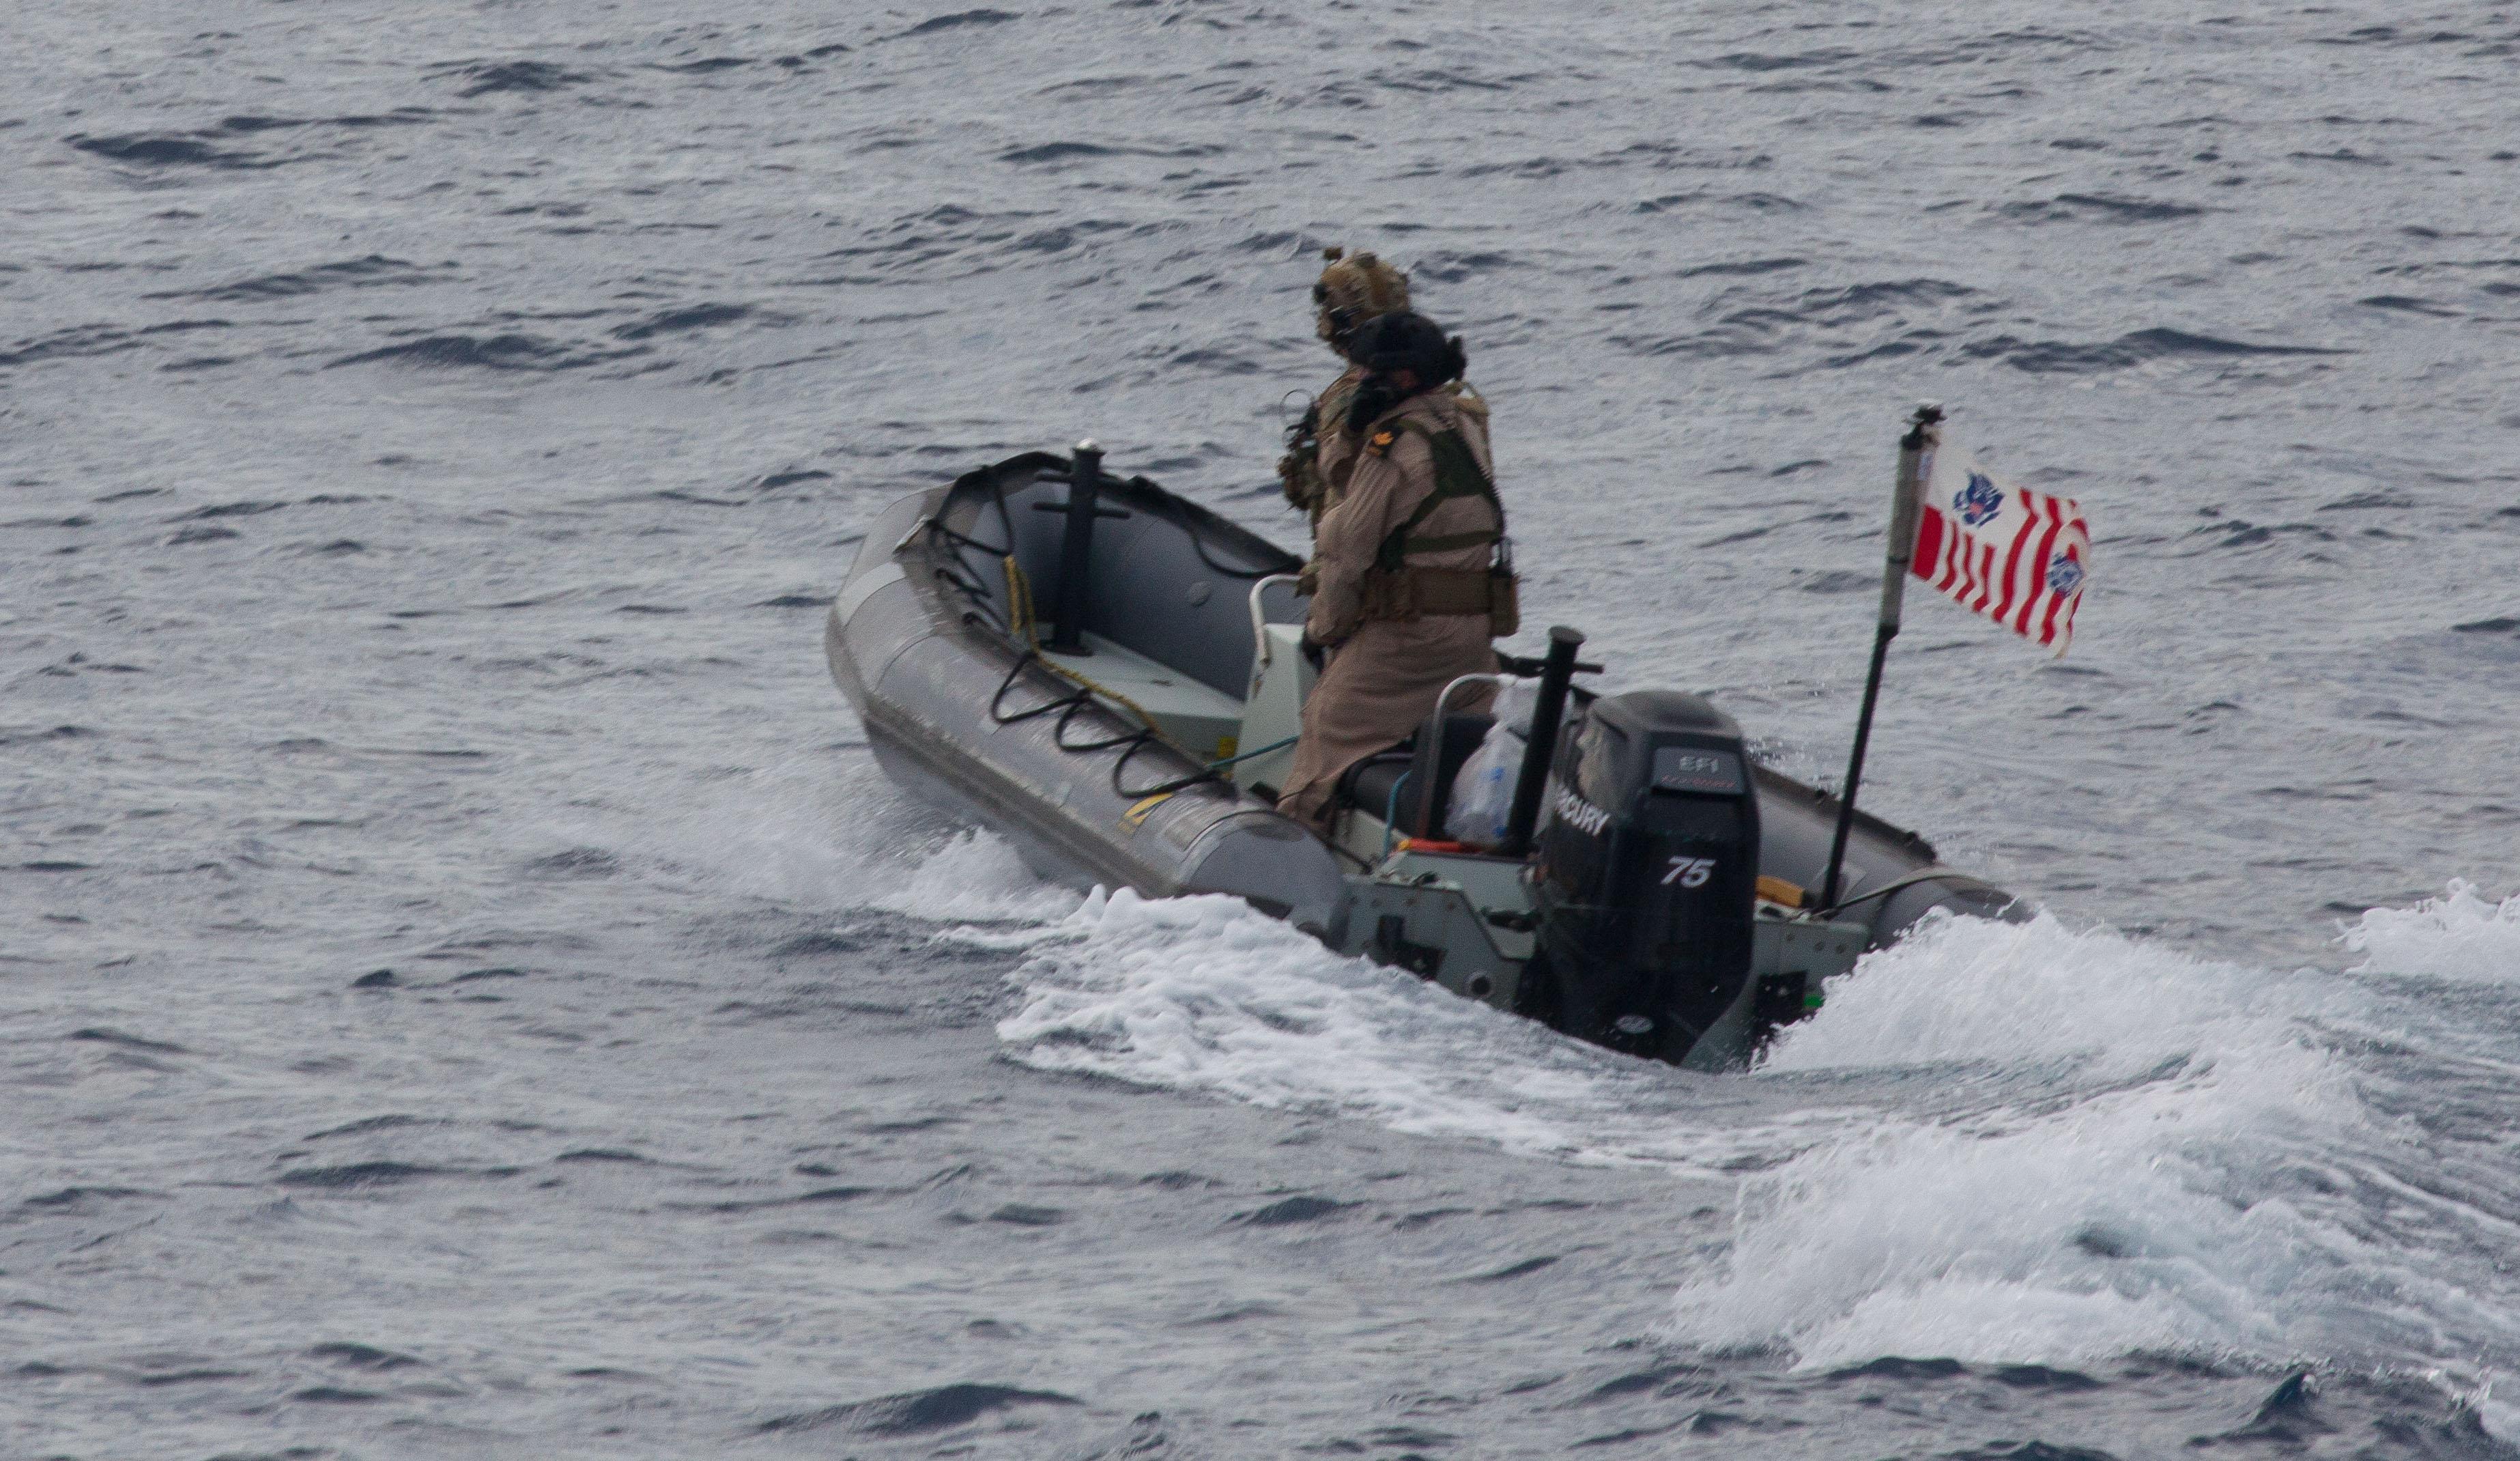 Members of the Royal Canadian Navy and the U.S. Coast Guard deploy a rigid-hulled inflatable boat from HMCS BRANDON upon sighting bales of illicit drugs in the Pacific Ocean during Operation CARIBBE on 5 November, 2016. Image By: Royal Canadian Navy Public Affairs